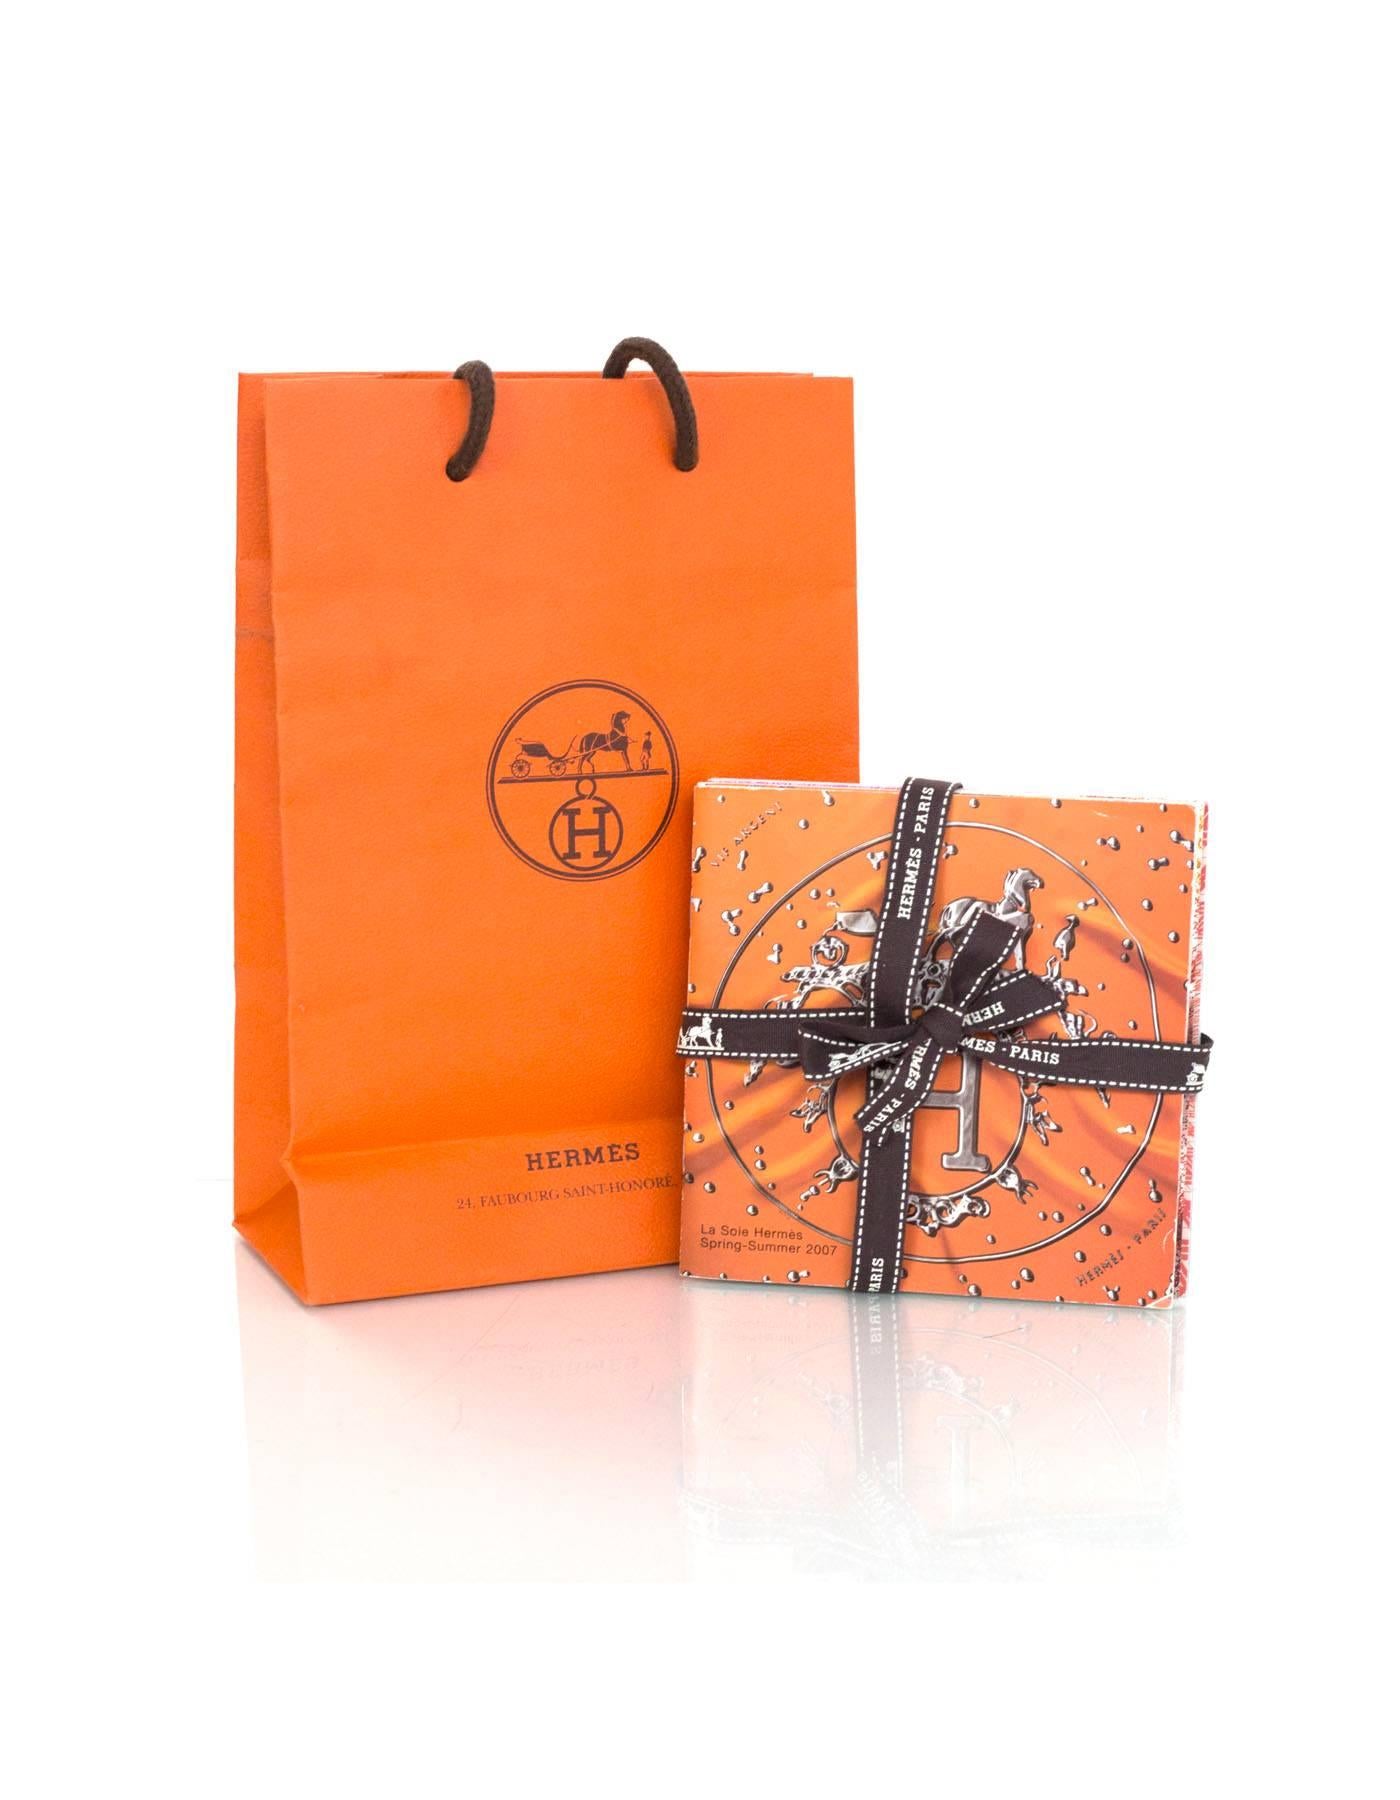 Set of four Hermes illustrated booklets featuring ways to tie Hermes scarves, prints and names. From SS '07, AW '07, SS '08 and SS '09. Shopping bag included.

 Condition: Excellent pre-owned condition

Measurements:
Booklets: 5"W x 5"L